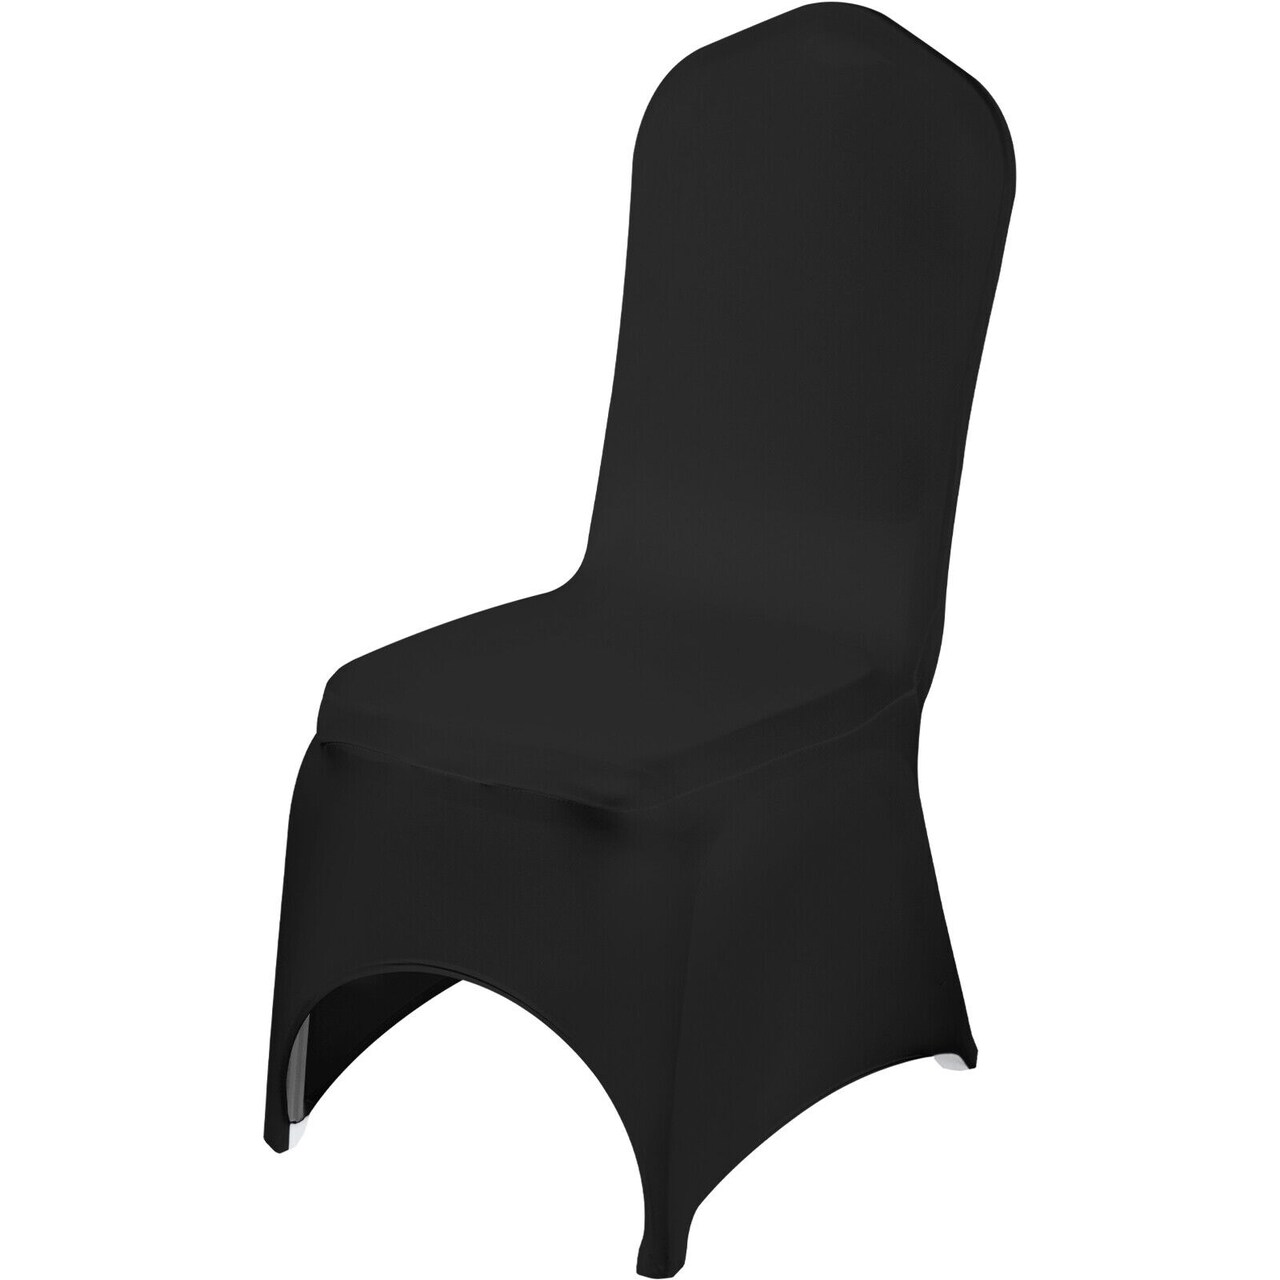 50Pcs Black Stretch Spandex Folding Chair Covers for Formal Decoration